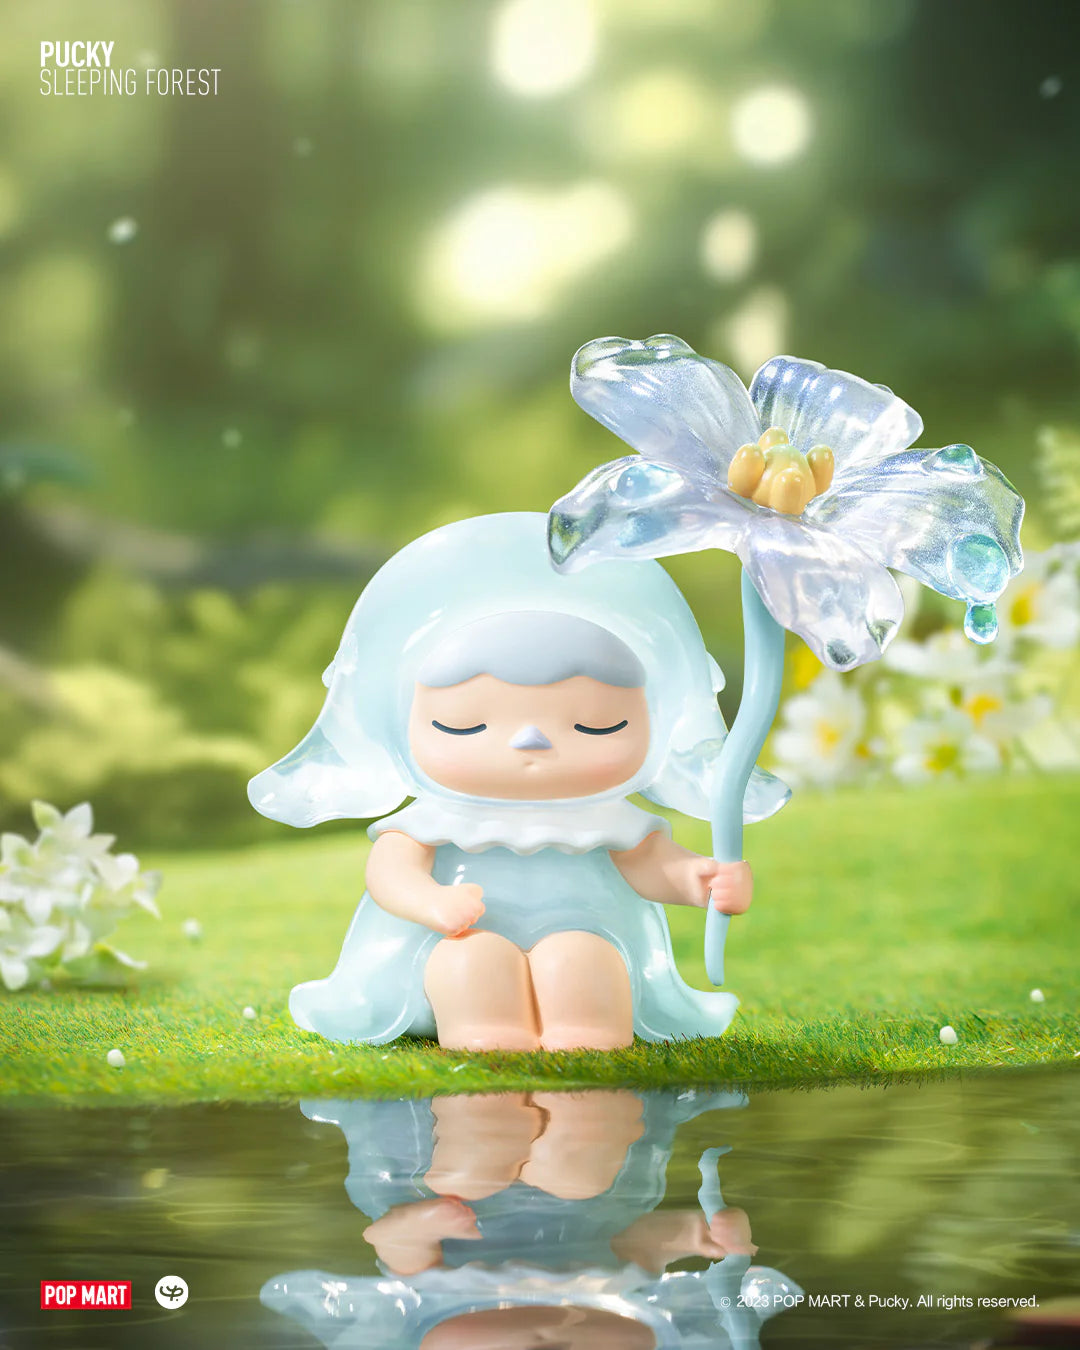 Pucky Sleeping Forest Blind Box Series